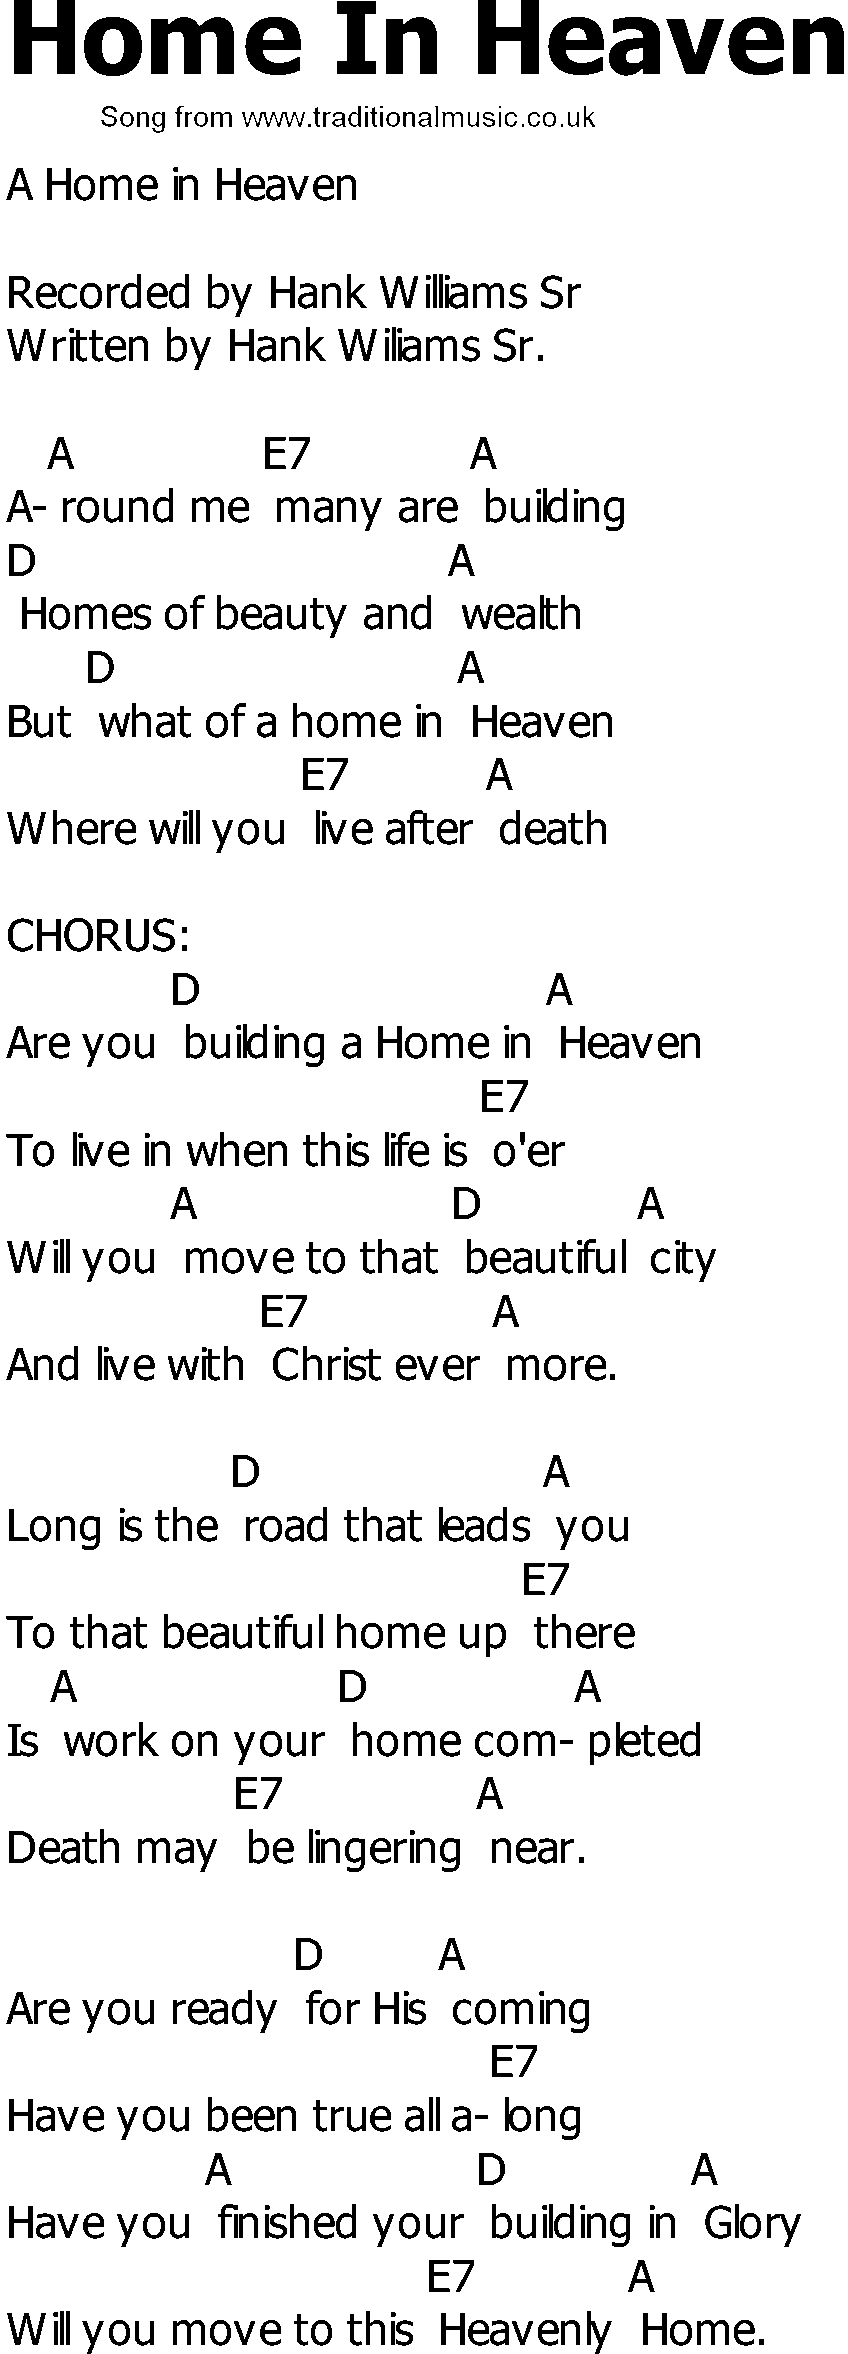 Old Country song lyrics with chords - Home In Heaven